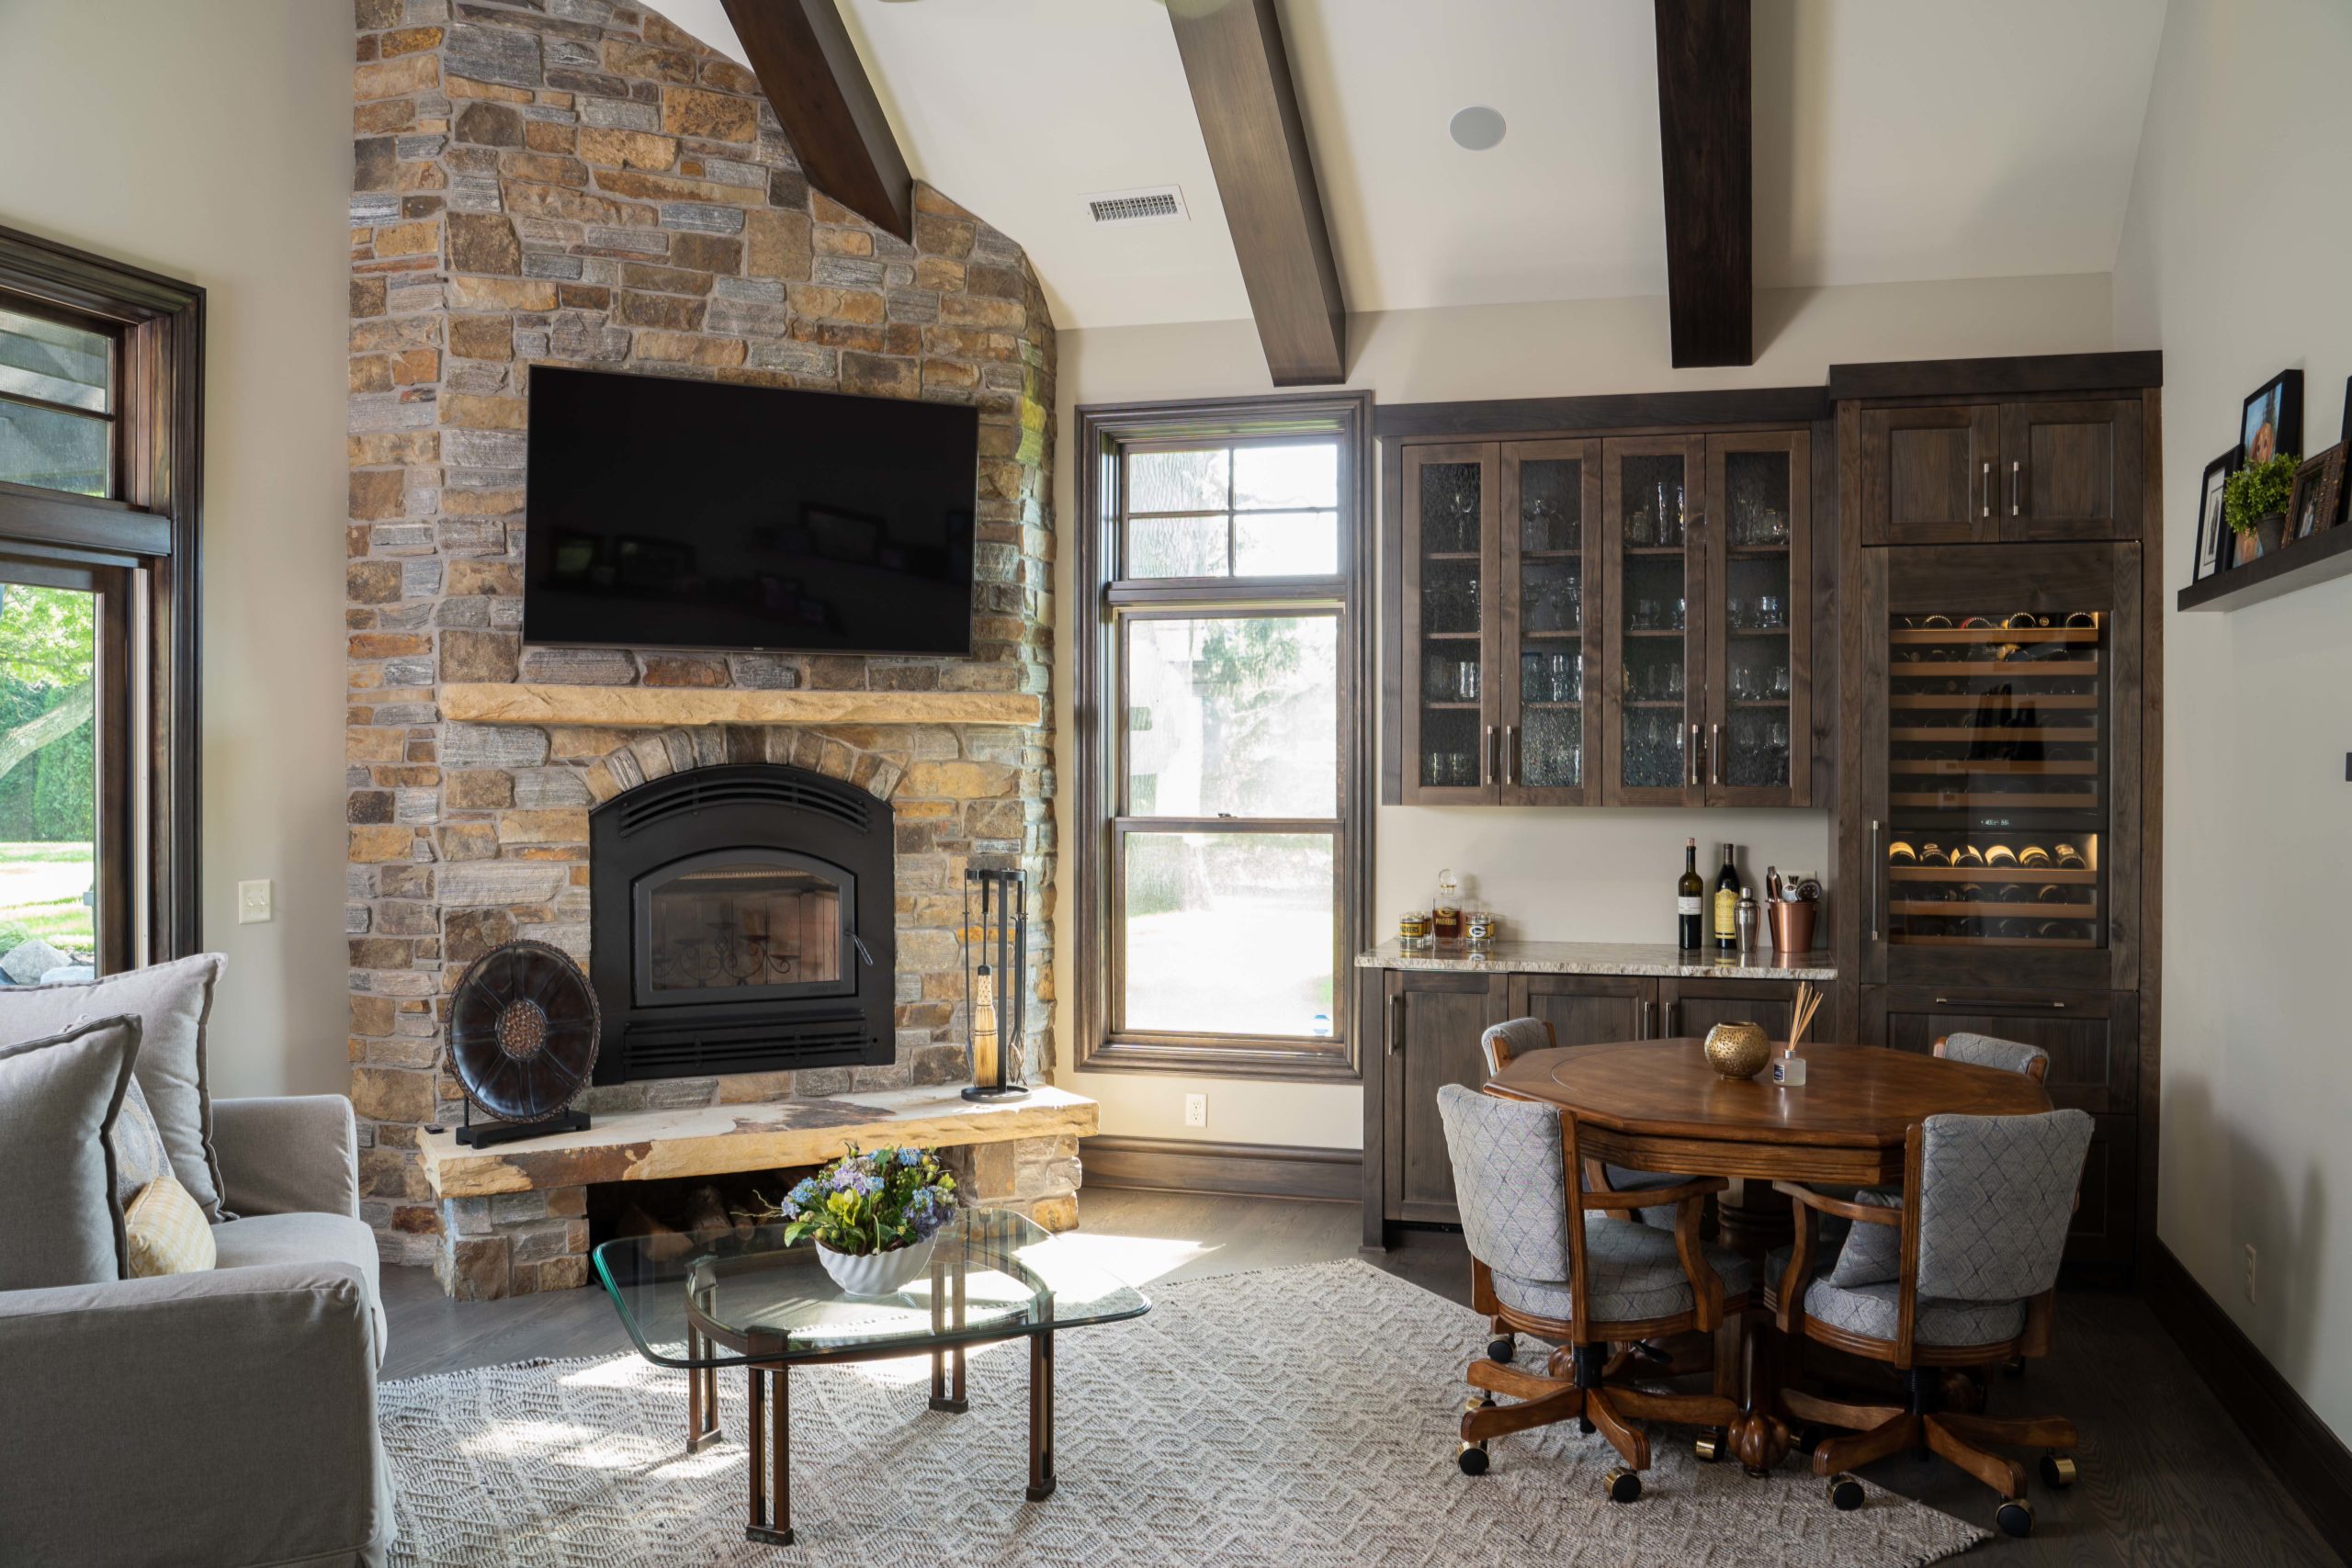 The Lake Escape custom home remodel features a living room with a stone fireplace and TV.